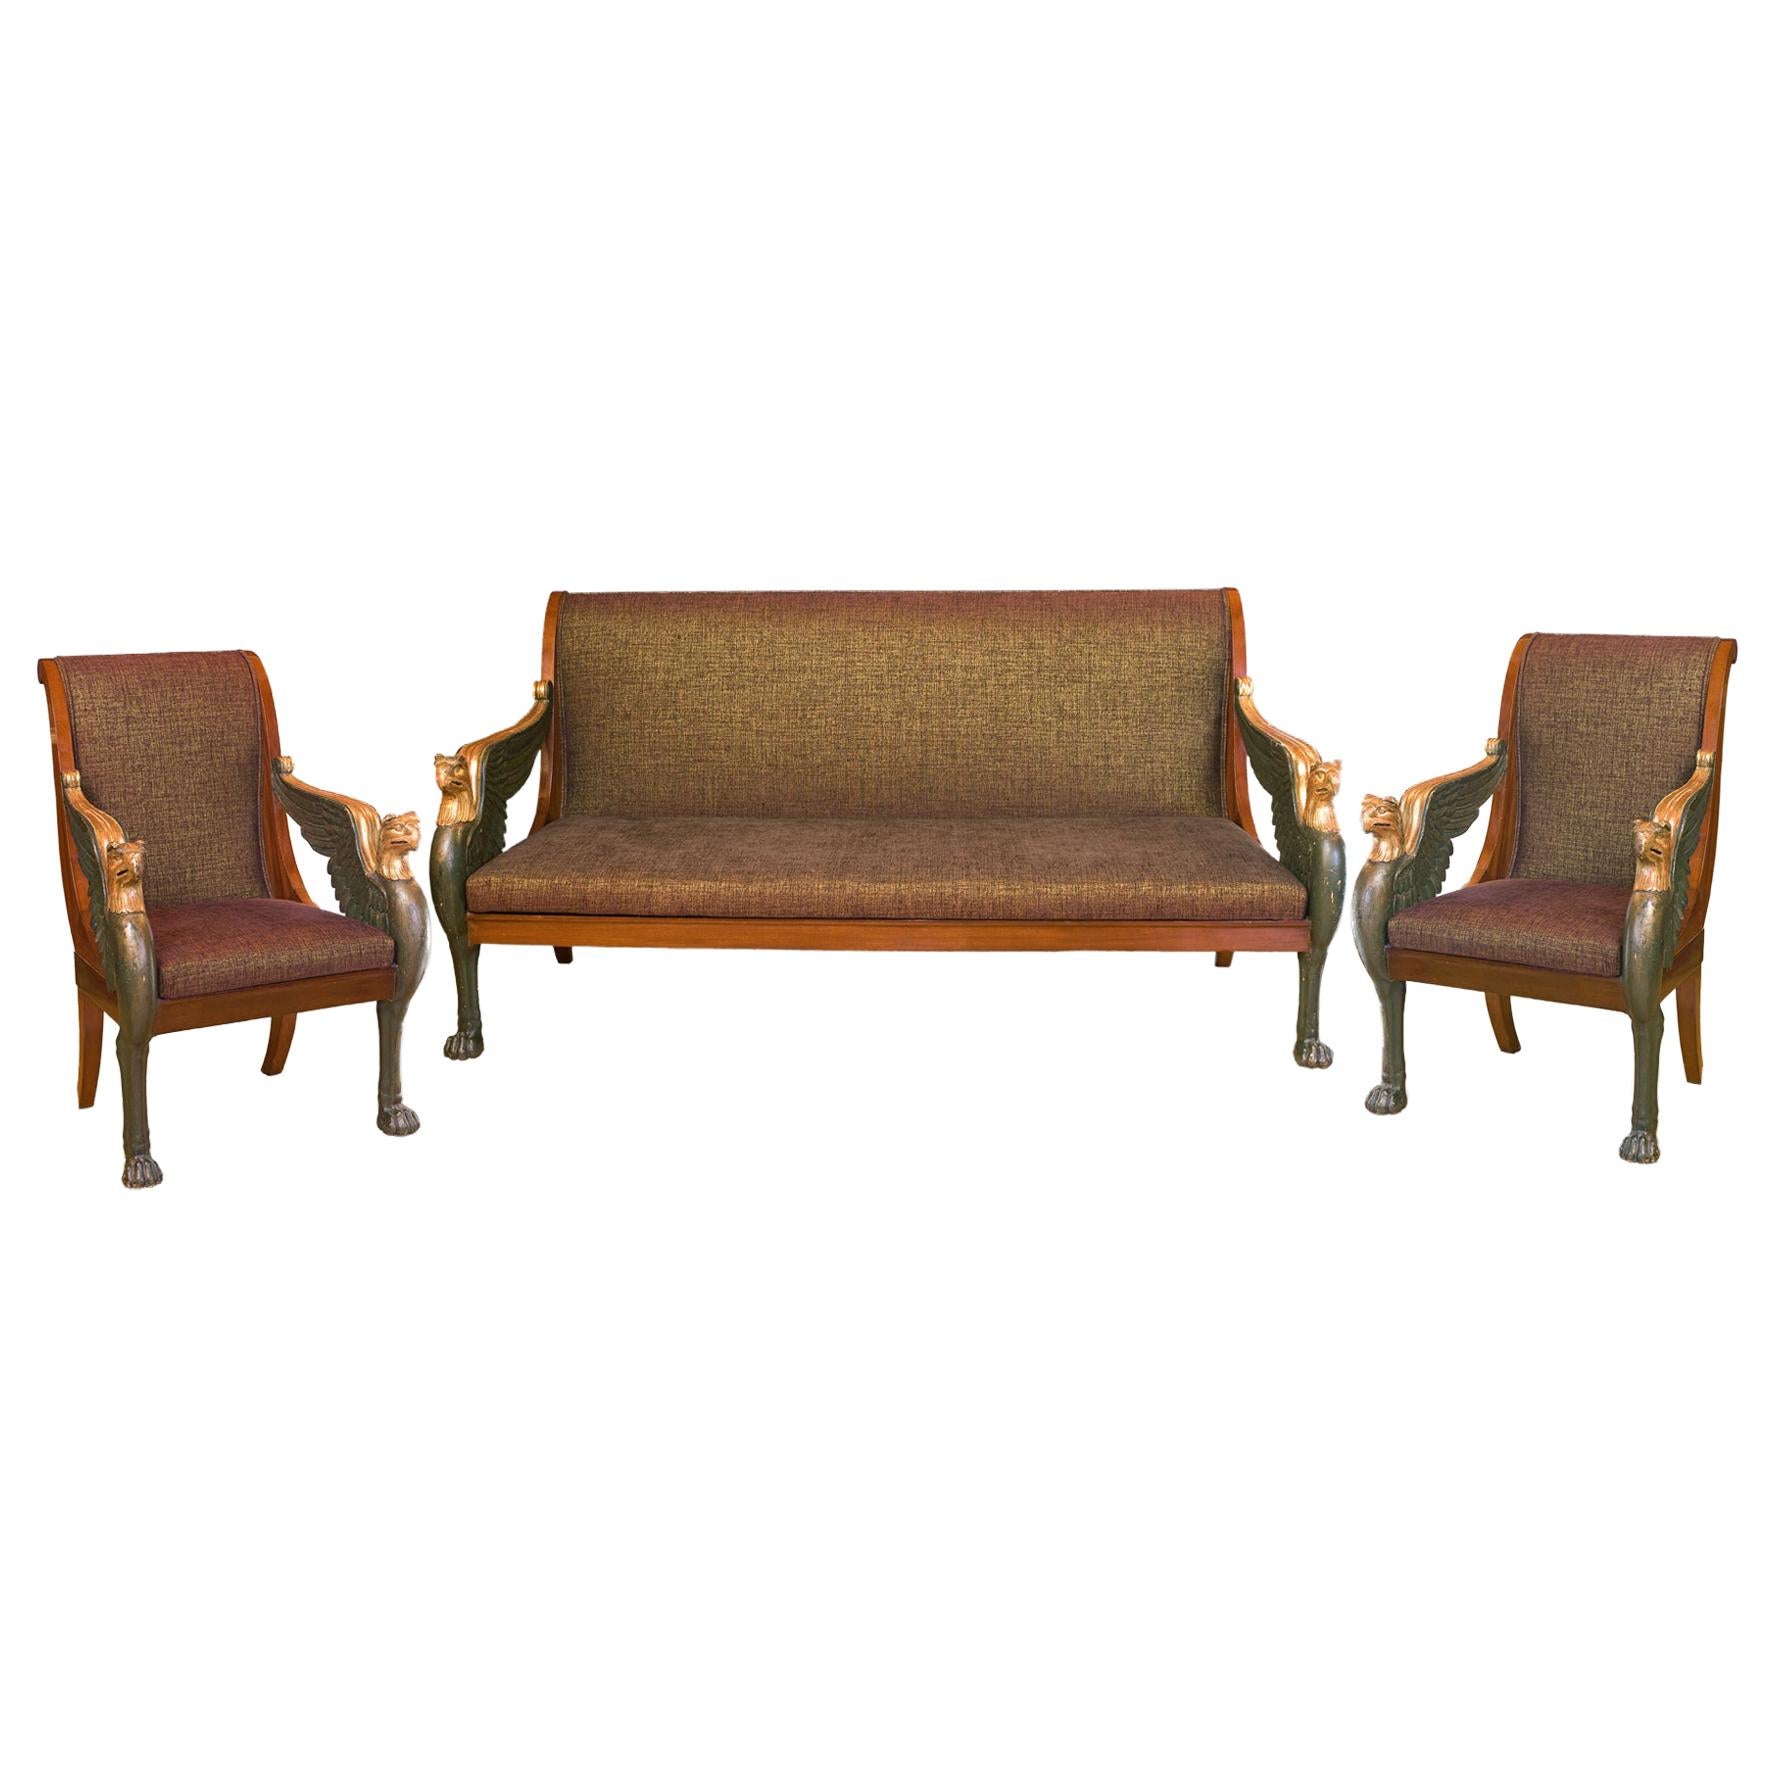 Two Armchairs and Settee of French, Empire Period